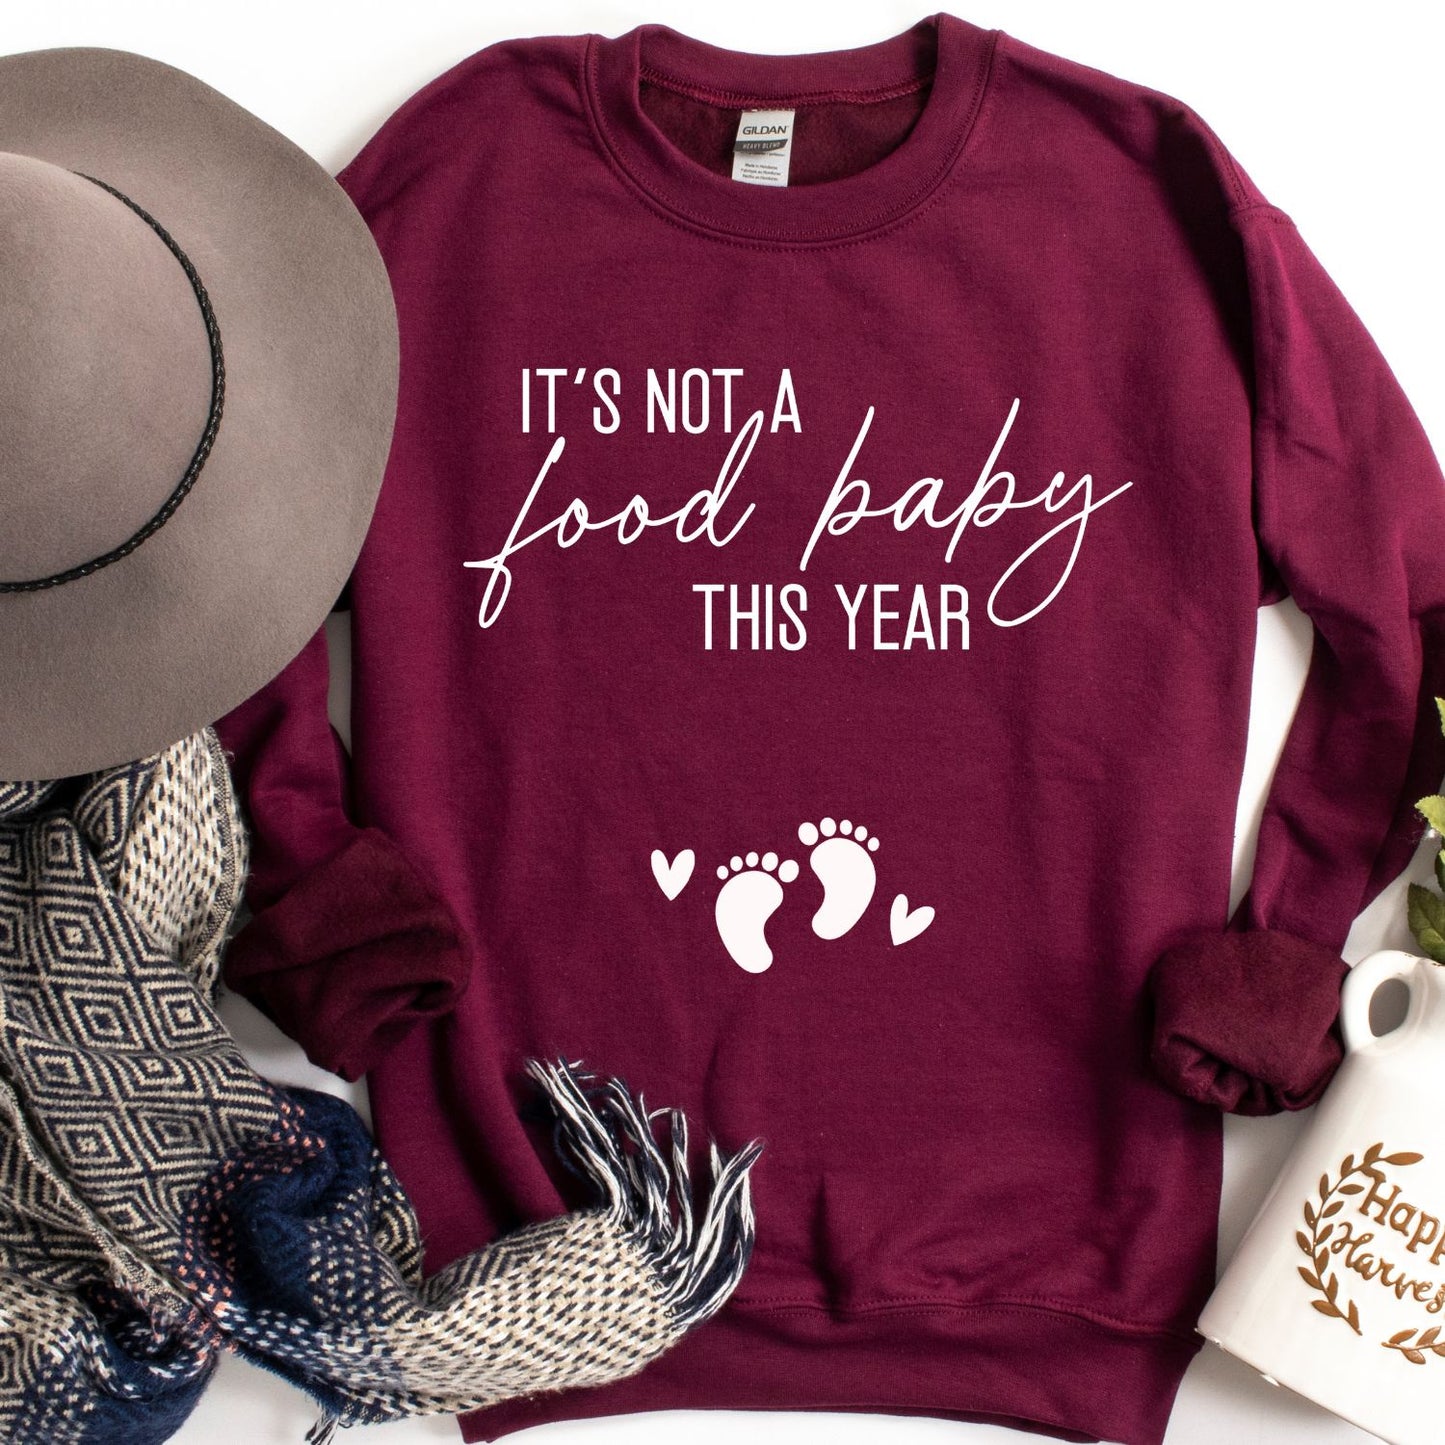 It's Not a Food Baby This Year Sweatshirt